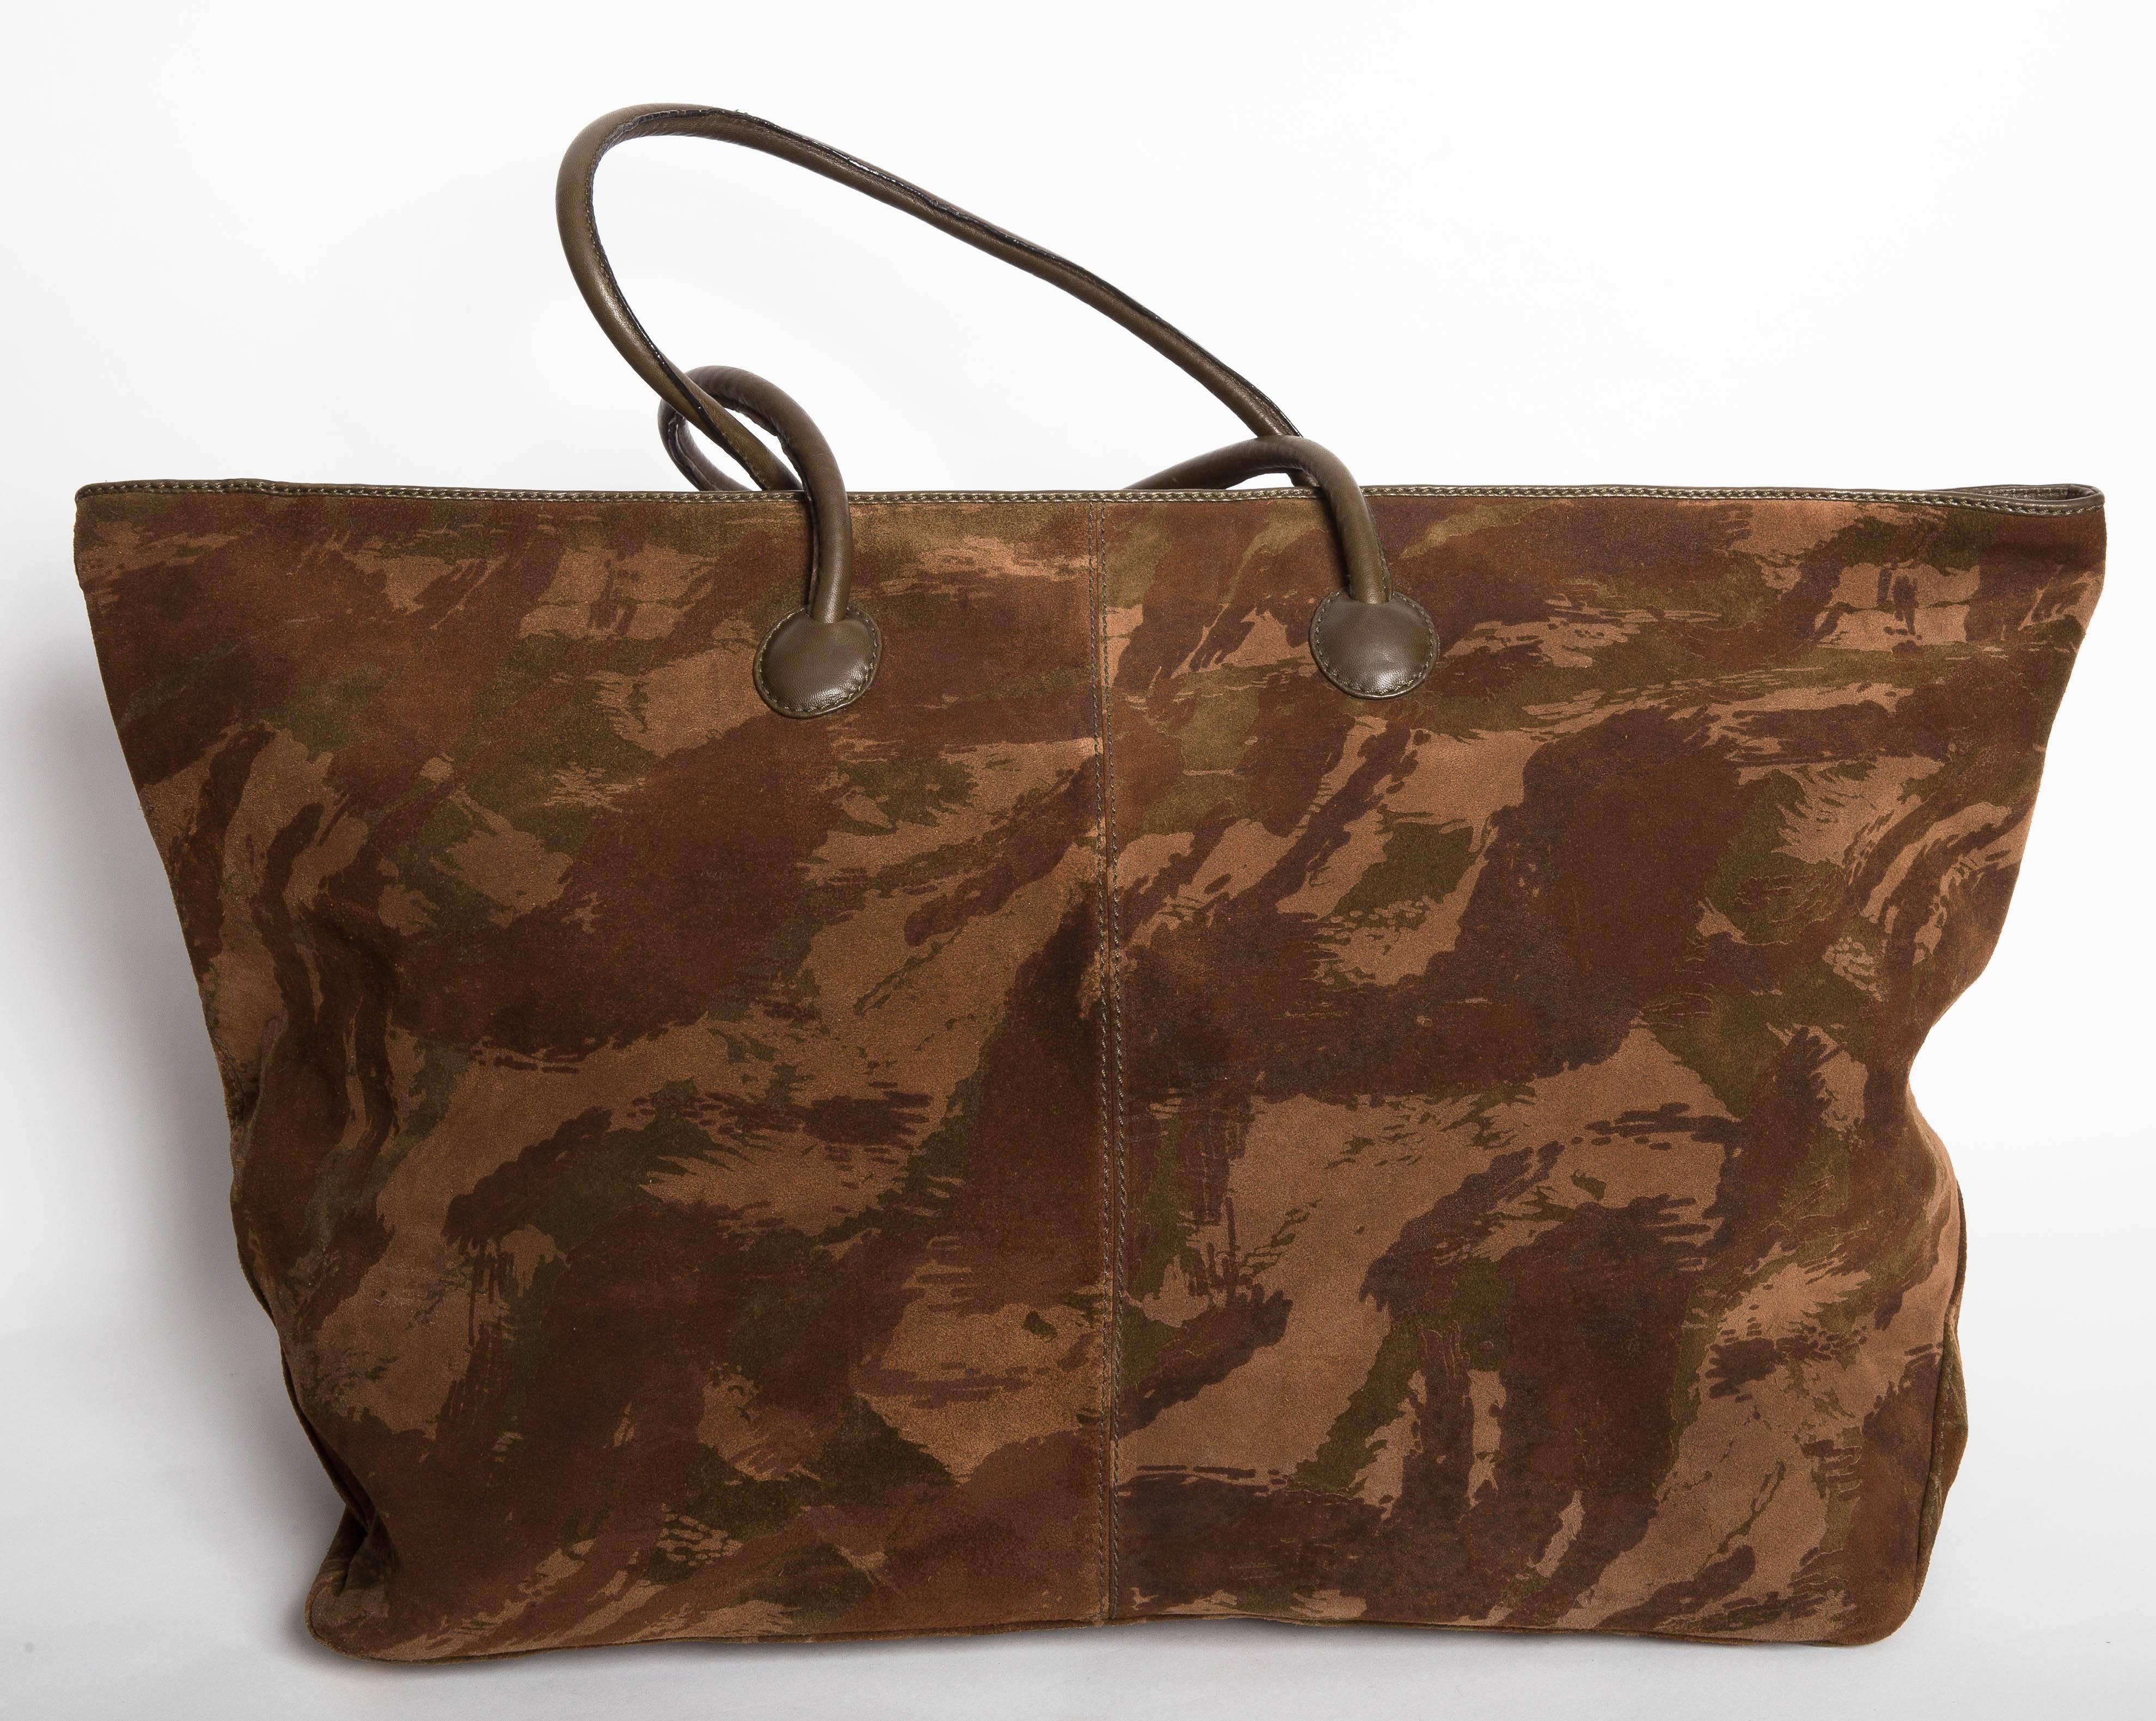 Stunning Bottega Veneta Camouflage Suede Duffle Bag with Double Leather Handles and five brass feet. Includes Leather ID case with toggle. This gorgeous duffle bag has a long zip closure and is lined in leather. Interior and exterior are in